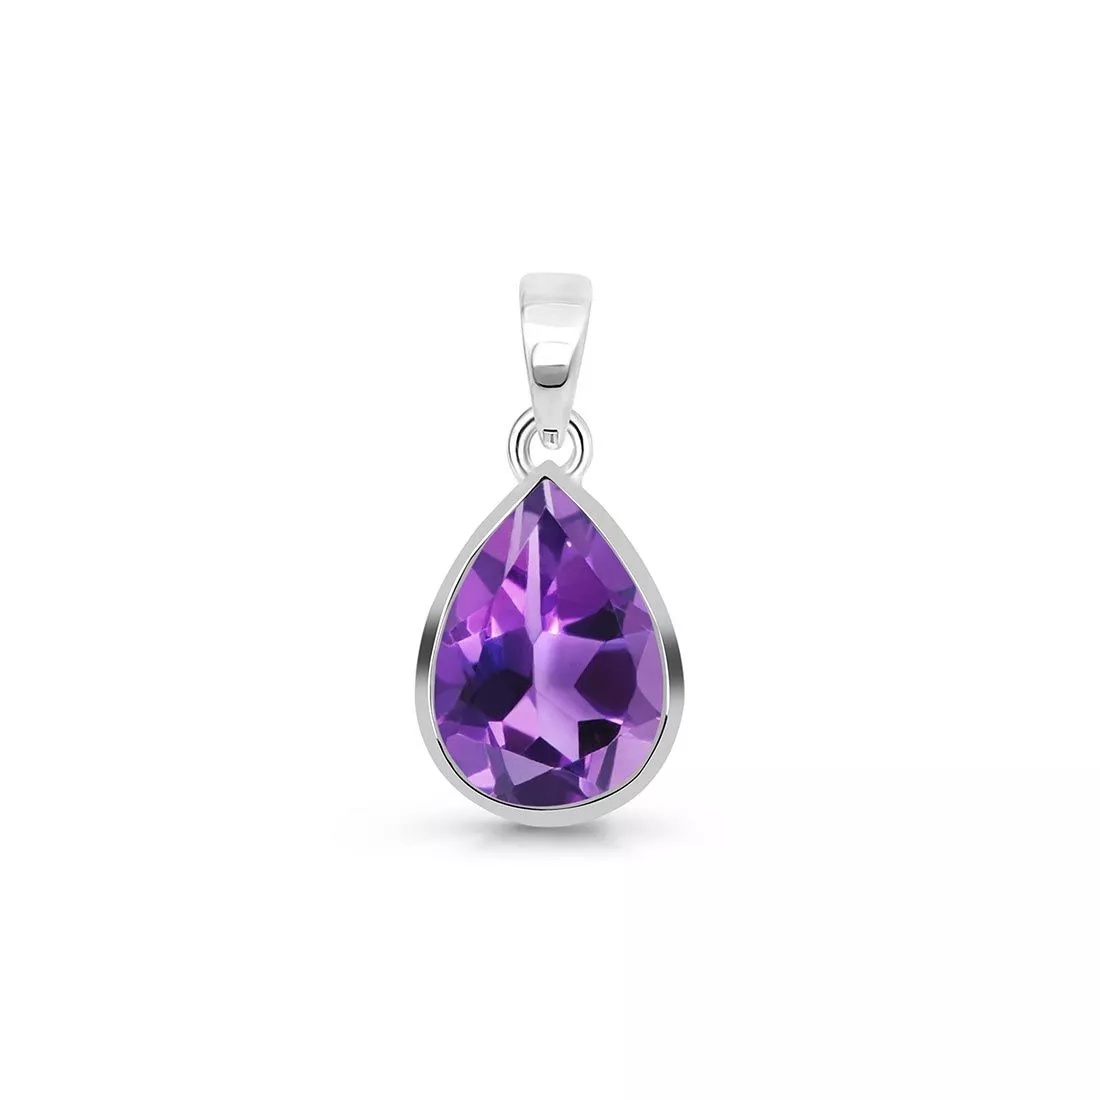 Gorgeous Amethyst Jewelry for a Glimmer of Elegance